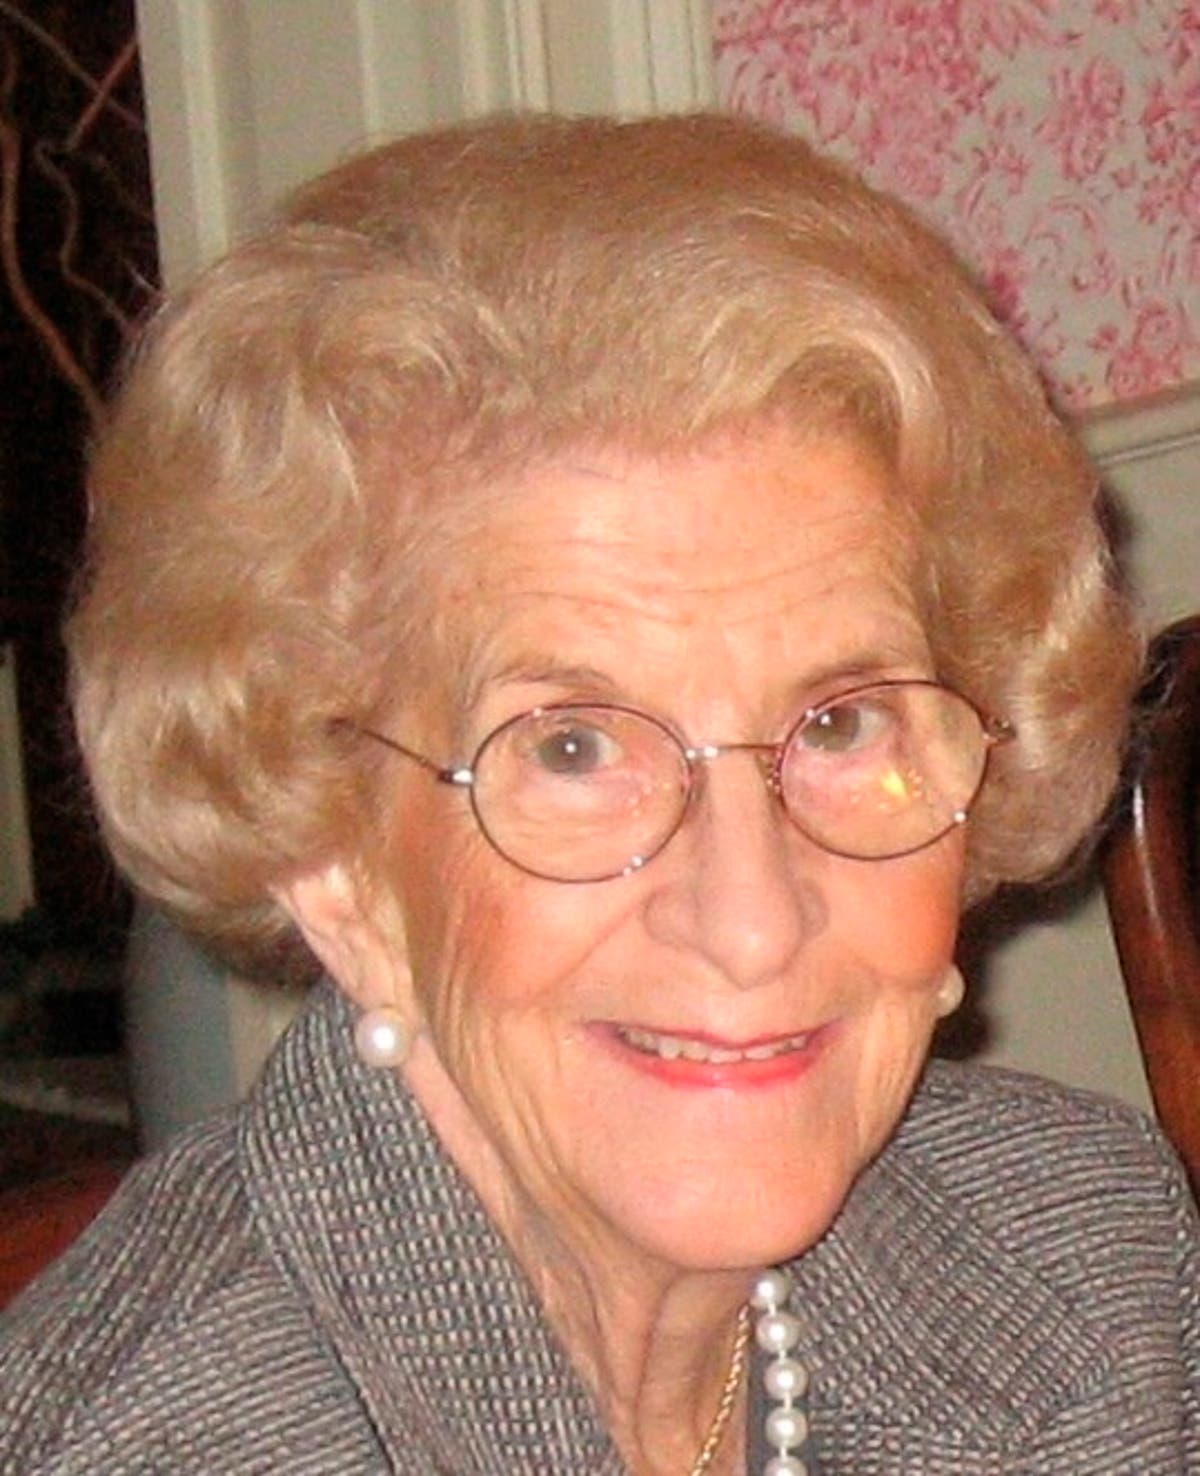 Nancy Keating, matriarch of influential family, で死ぬ 94